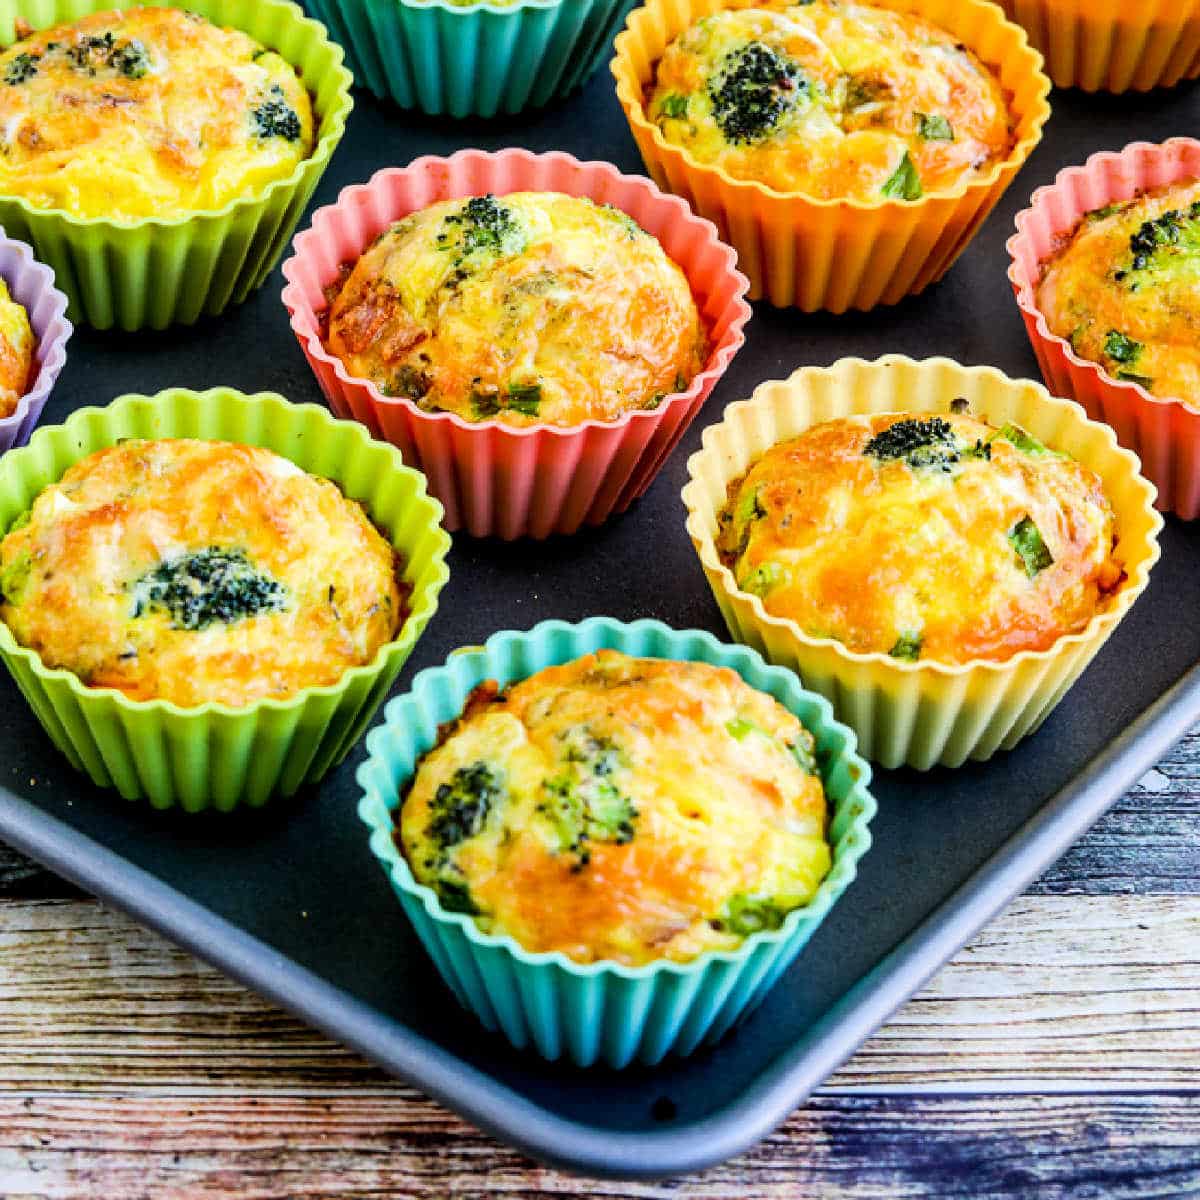 Square image of Keto Egg Muffin Recipe with Broccoli, Bacon, and Cheese shown on baking sheet.